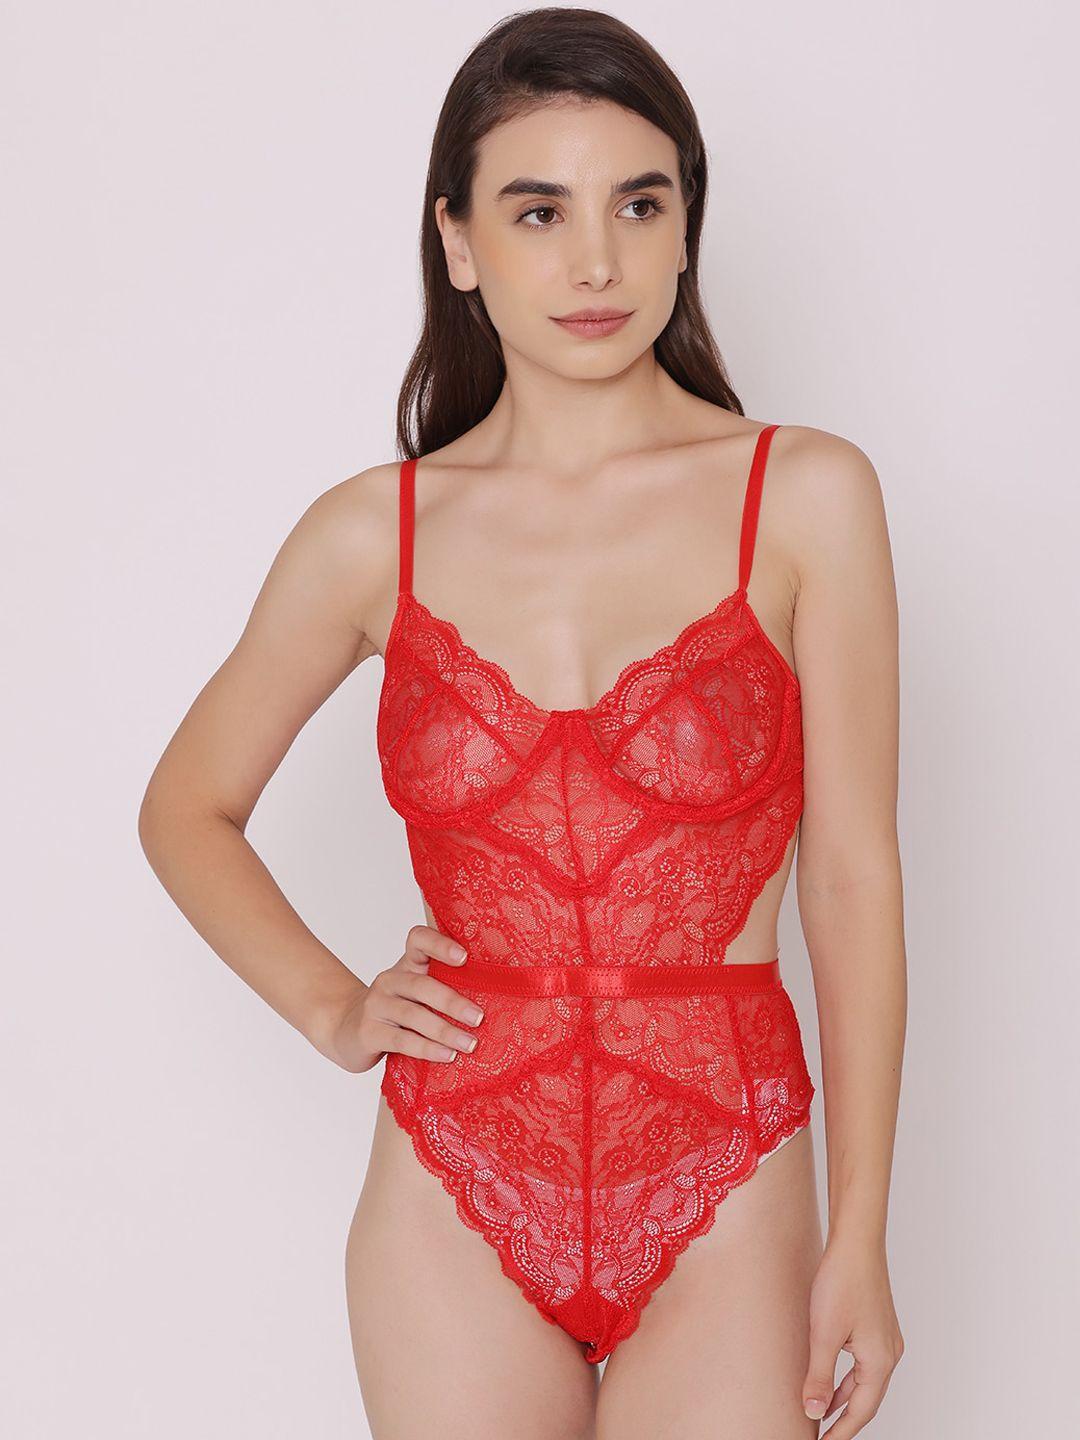 treasure chest veronica sheer non padded non wired lace bodysuit